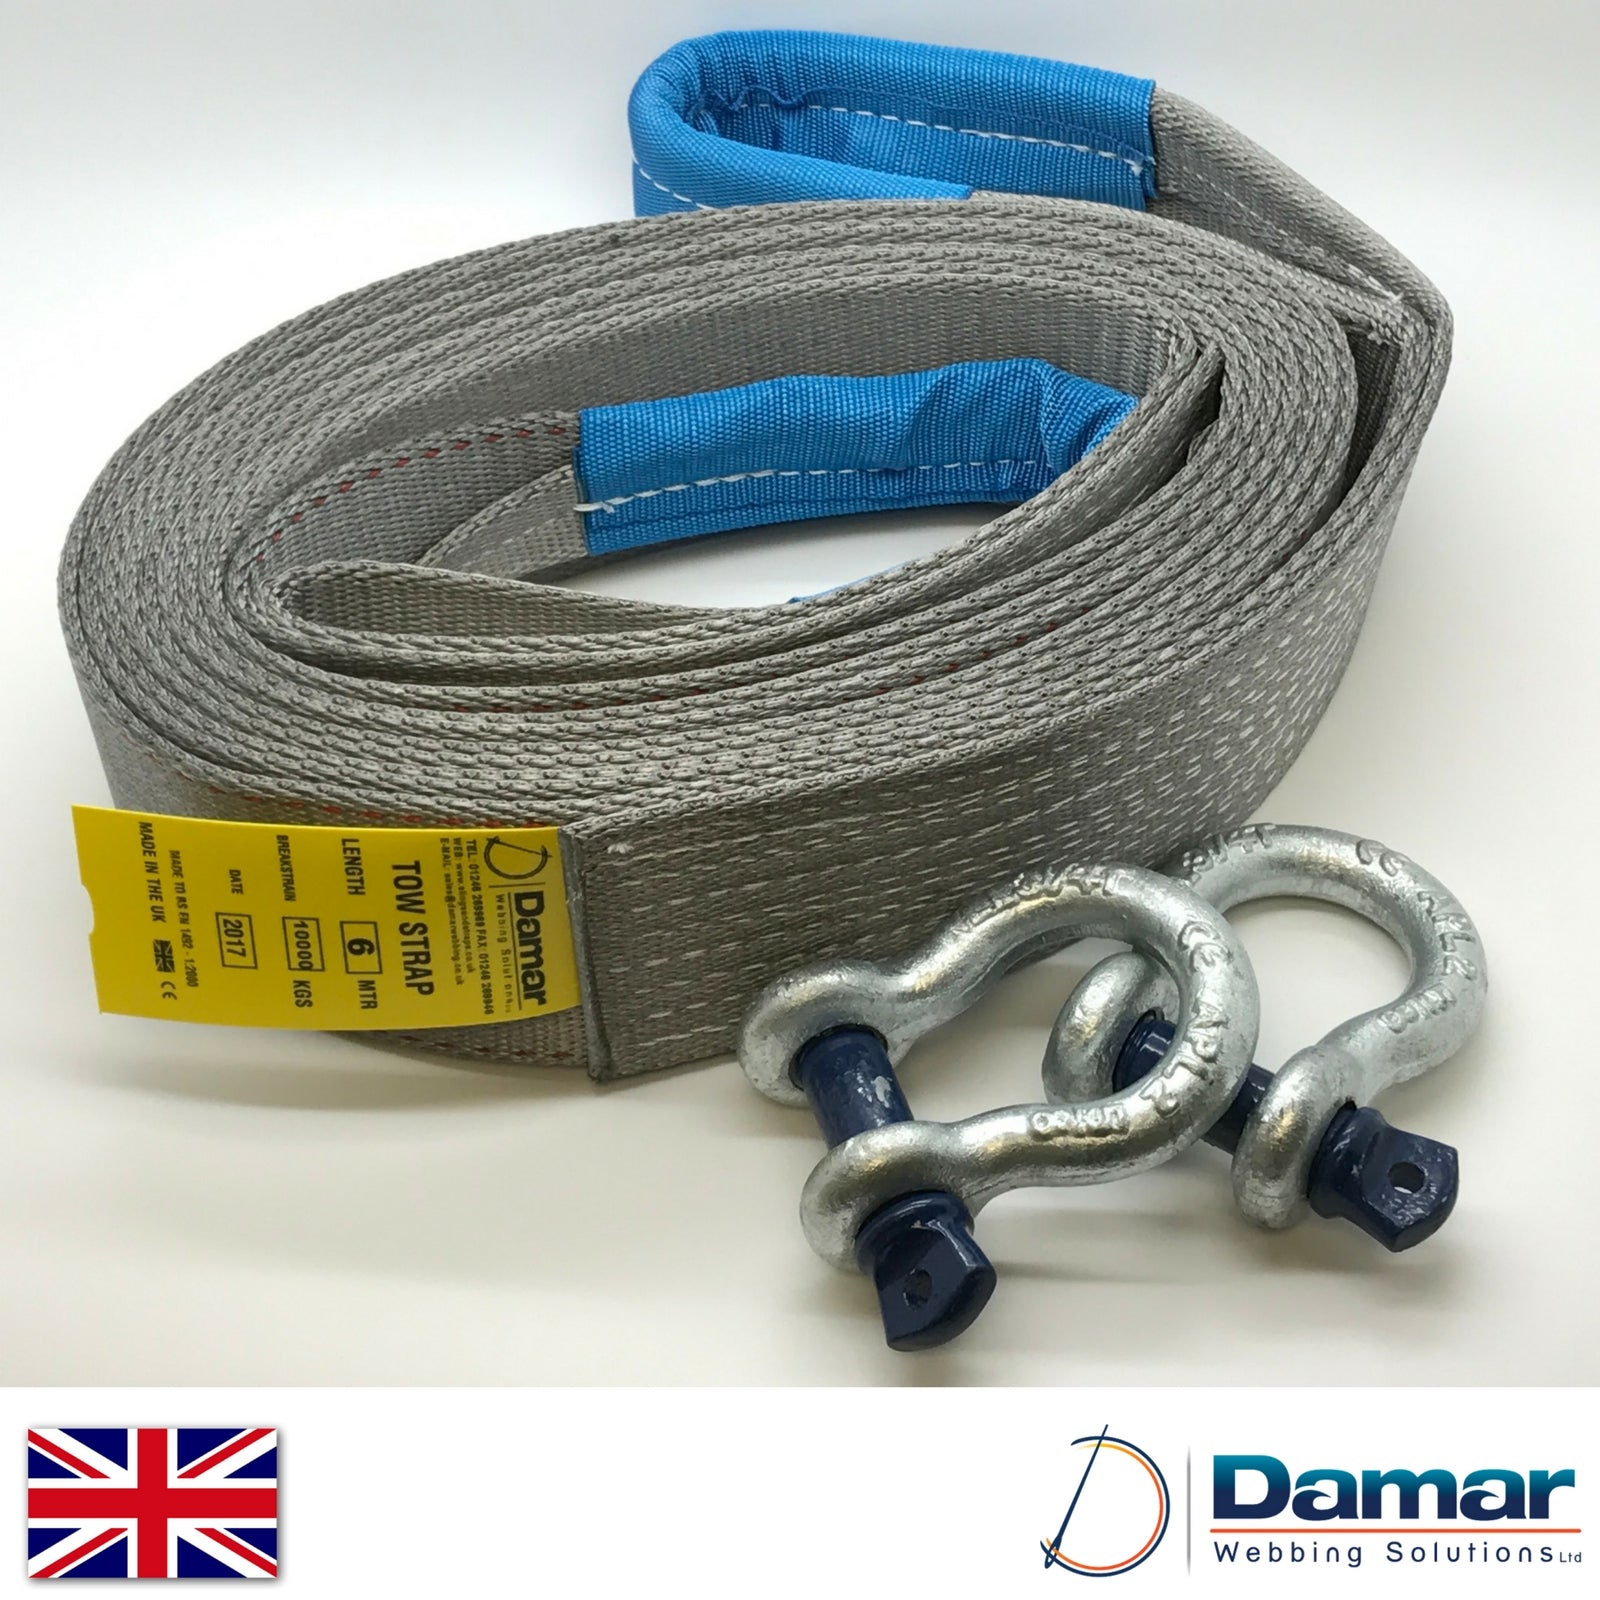 Up to 4 tonnes Yellow Strap-Style Tow Rope AA 5060114616226 Heavy-Duty Towing Belt for Vehicles 